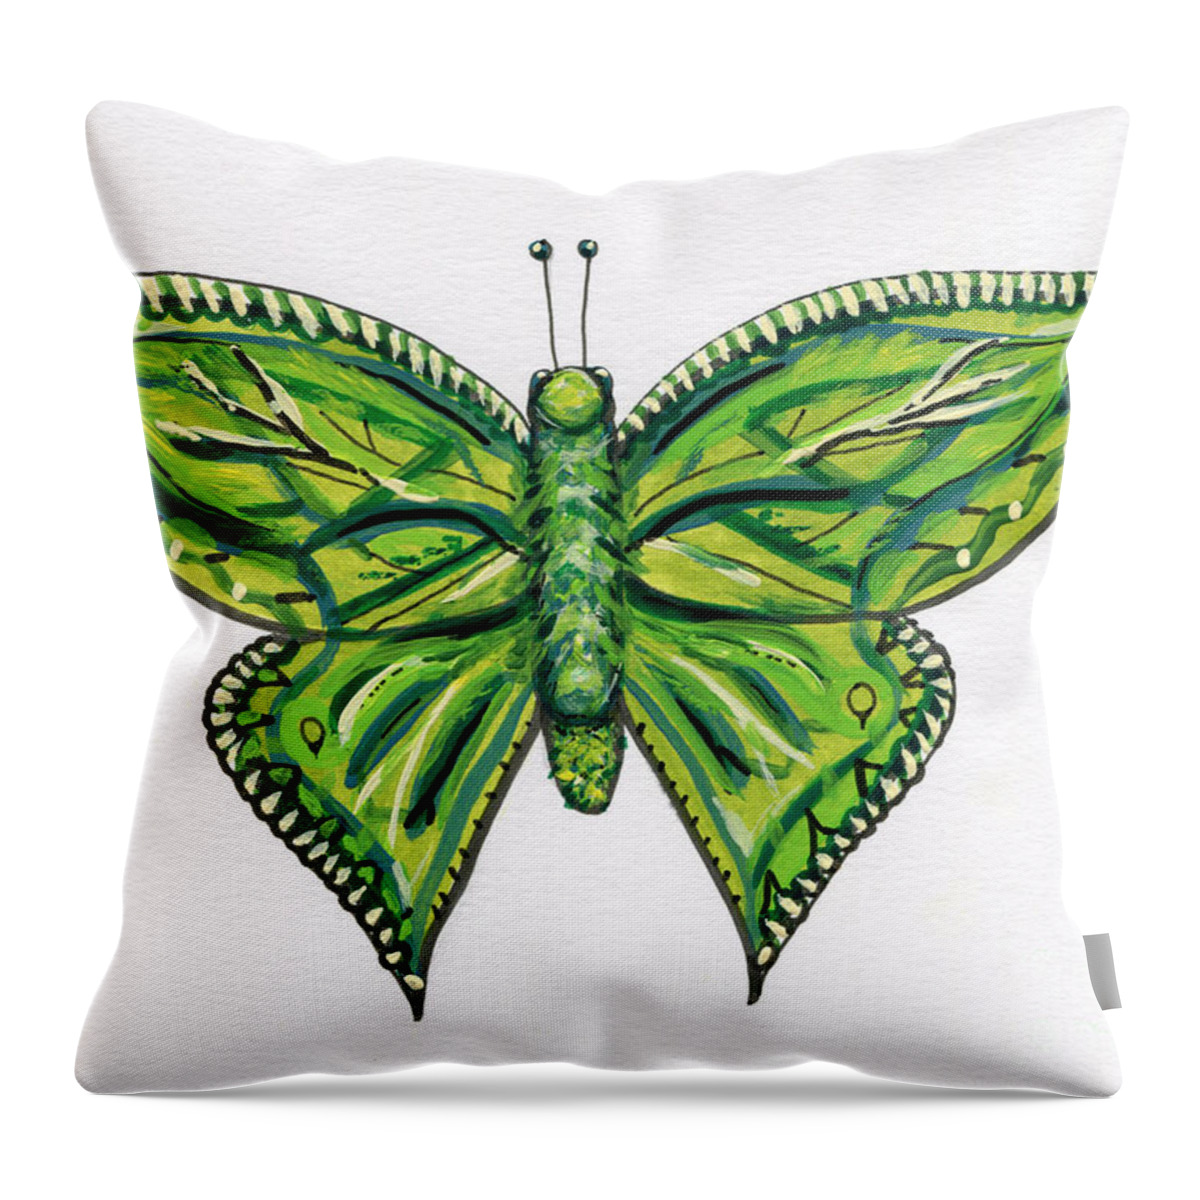 Green Throw Pillow featuring the painting Green Butterfly Illustration by Catherine Gruetzke-Blais